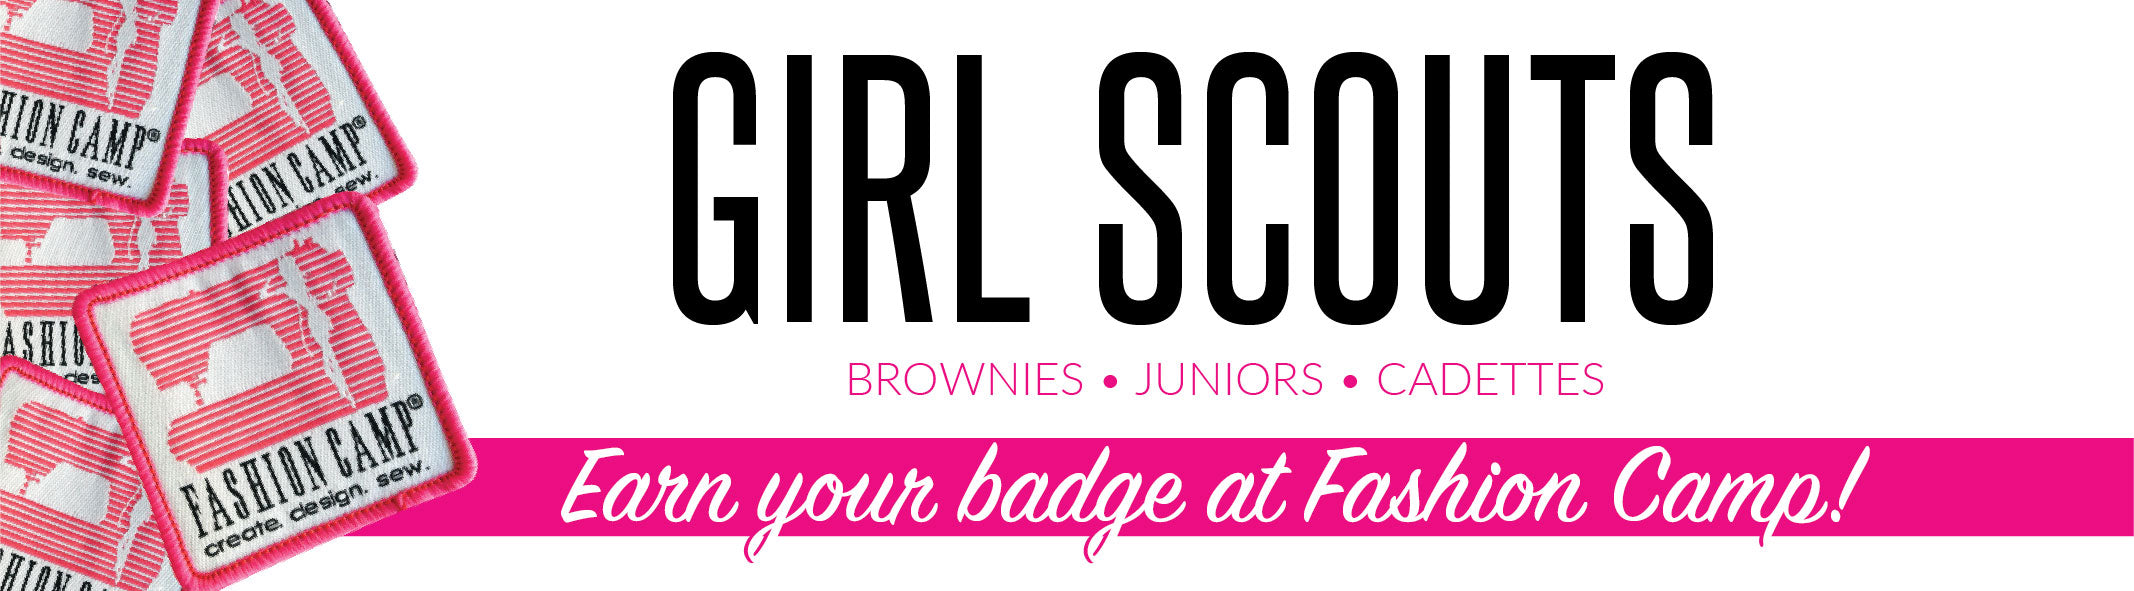 Girl Scouts- earn your badge at Fashion Camp. Brownies, juniors, cadettes.